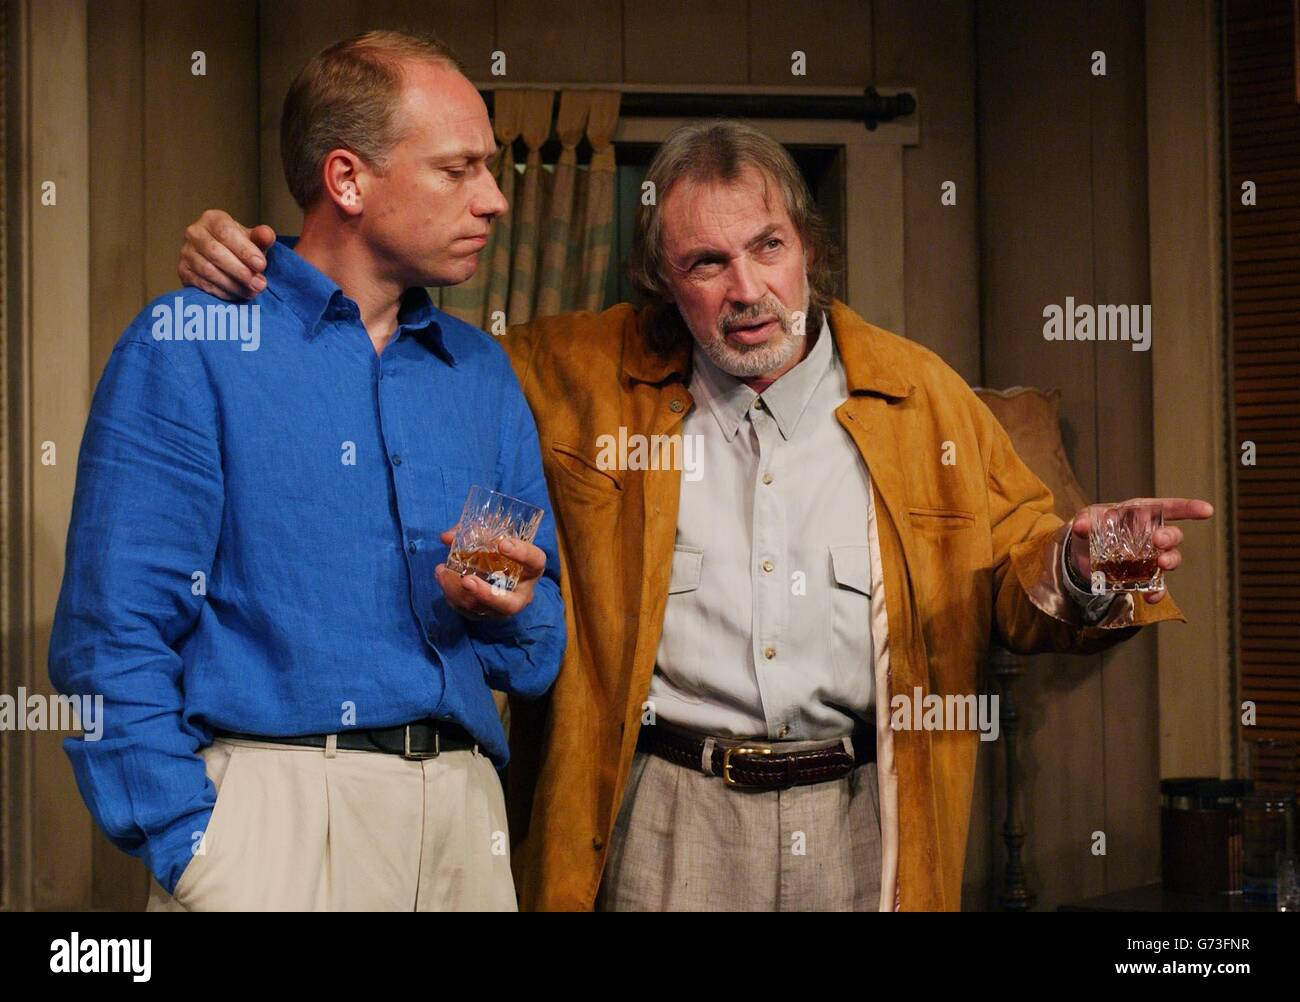 Actors Rupert Wickham (left) as Gerardo Escobar, and Leigh Lawson as Dr Roberto Miranda, during a photocall for the play 'Death and The Maiden', by Ariel Dorfman, at The King's Head Theatre in Islington, north London. Stock Photo